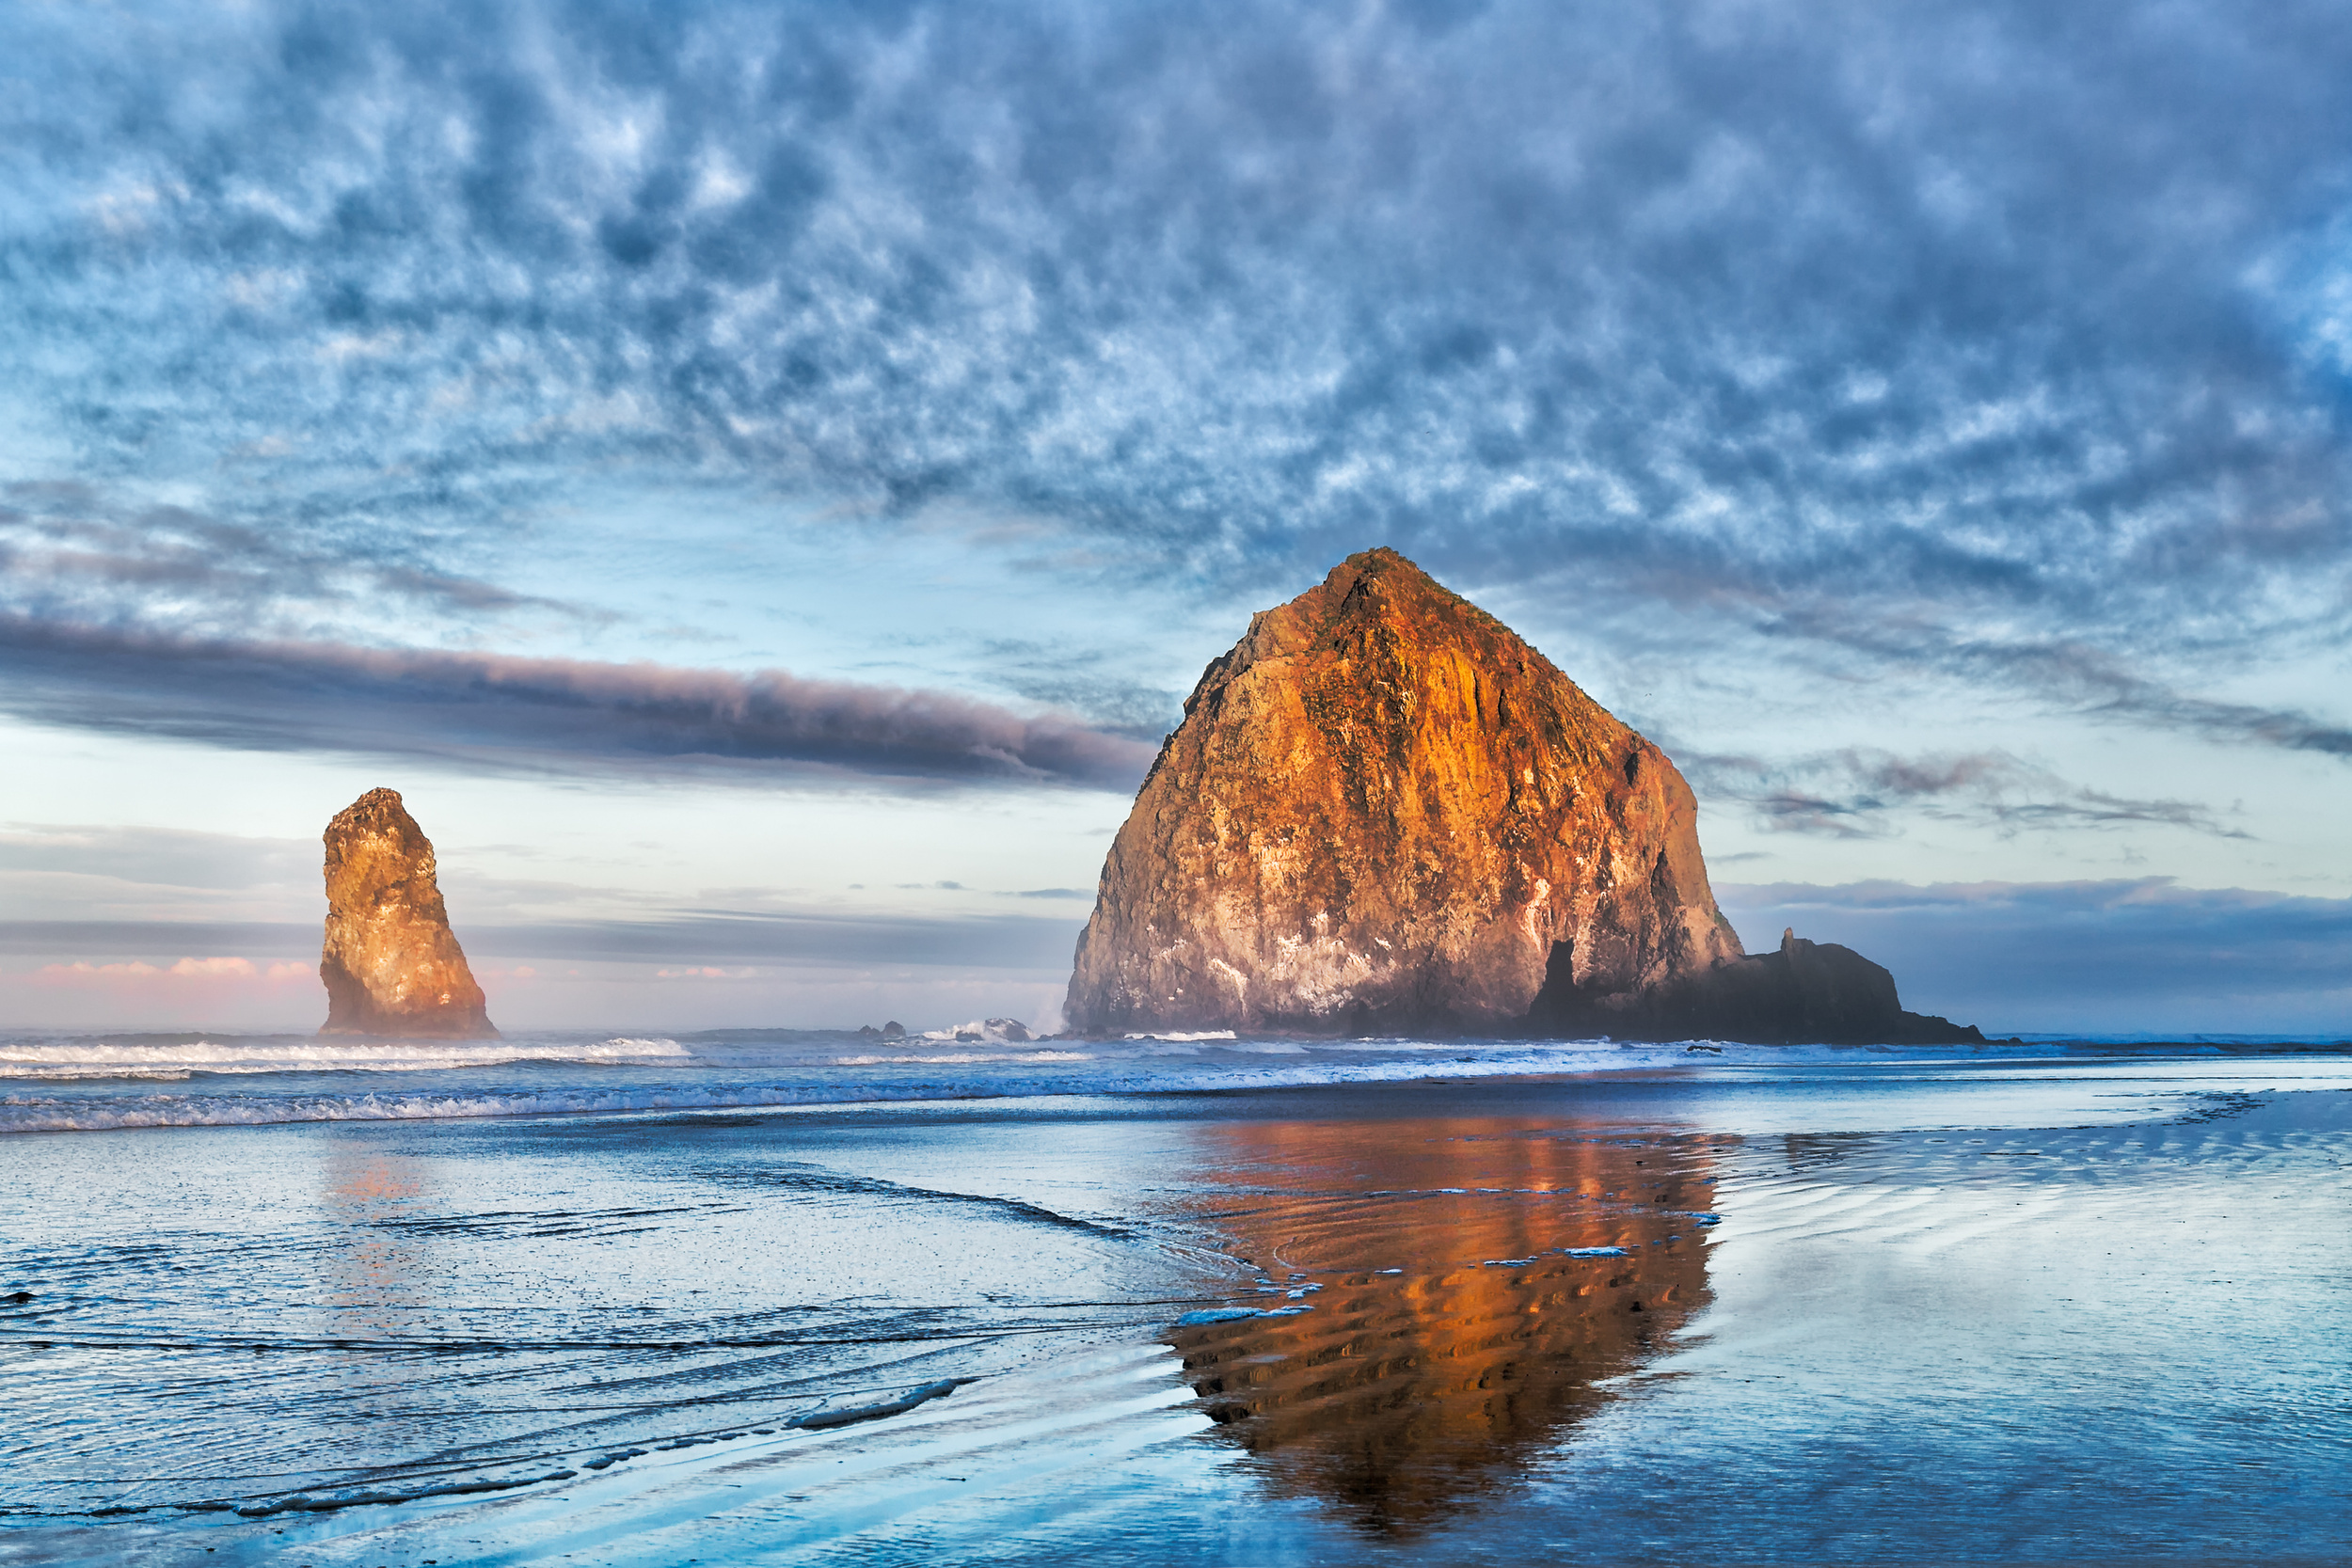 <p>Cannon Beach is likely Oregon's most famous beach town, evidenced by its in-demand status come spring break in the Pacific Northwest. Best known for a white sandy beach that stretches for miles and features Haystack Rock. It’s also great for tide-pooling, dog-friendly, or browsing the many galleries and boutiques. Active visitors can choose from one of the plentiful hiking trails in the area.</p><p><a href='https://www.msn.com/en-us/community/channel/vid-cj9pqbr0vn9in2b6ddcd8sfgpfq6x6utp44fssrv6mc2gtybw0us'>Follow us on MSN to see more of our exclusive lifestyle content.</a></p>